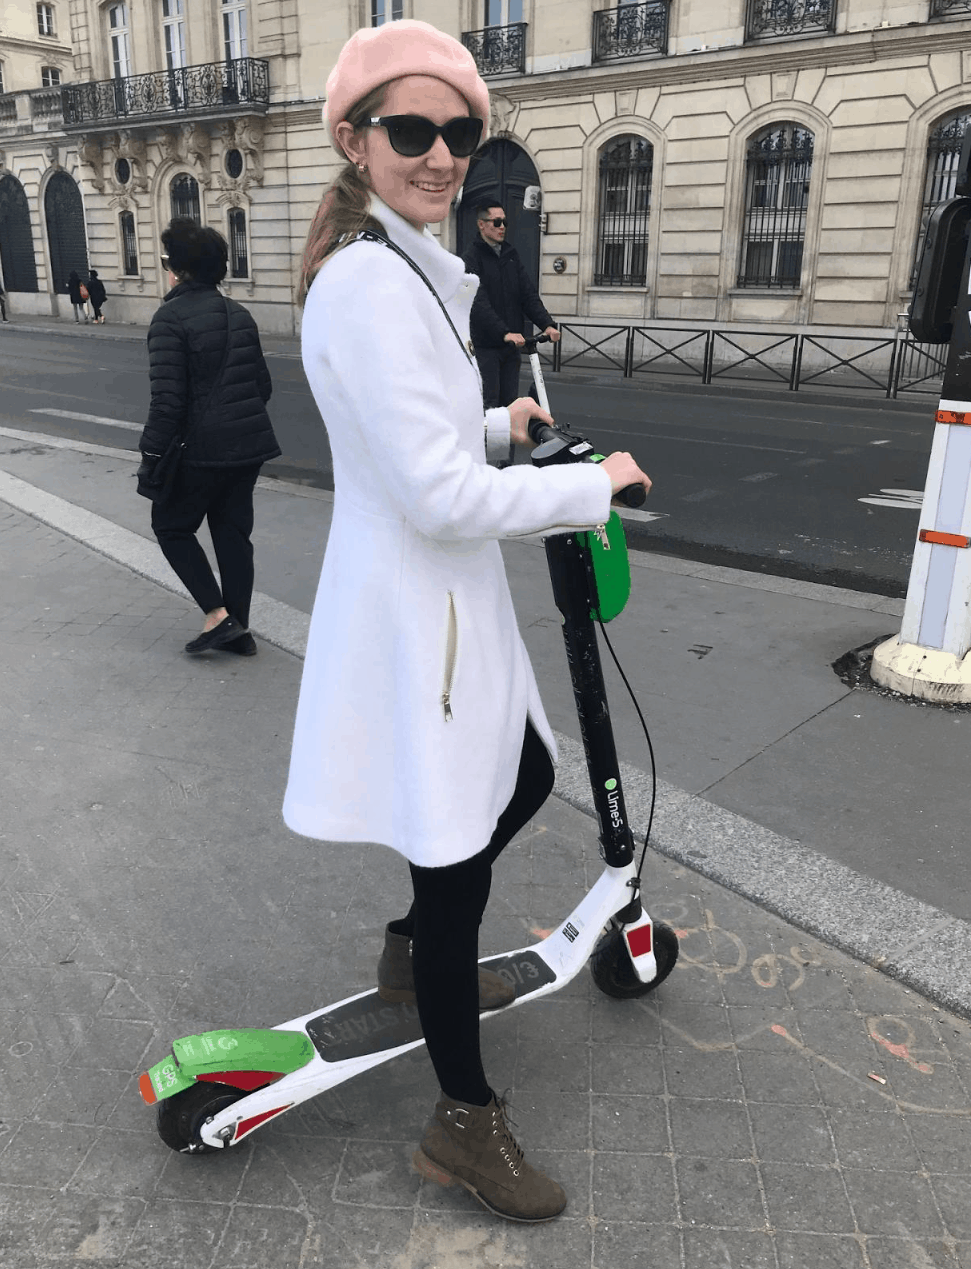 Renting scooters in Paris is a great way to get around during spring in Paris! 